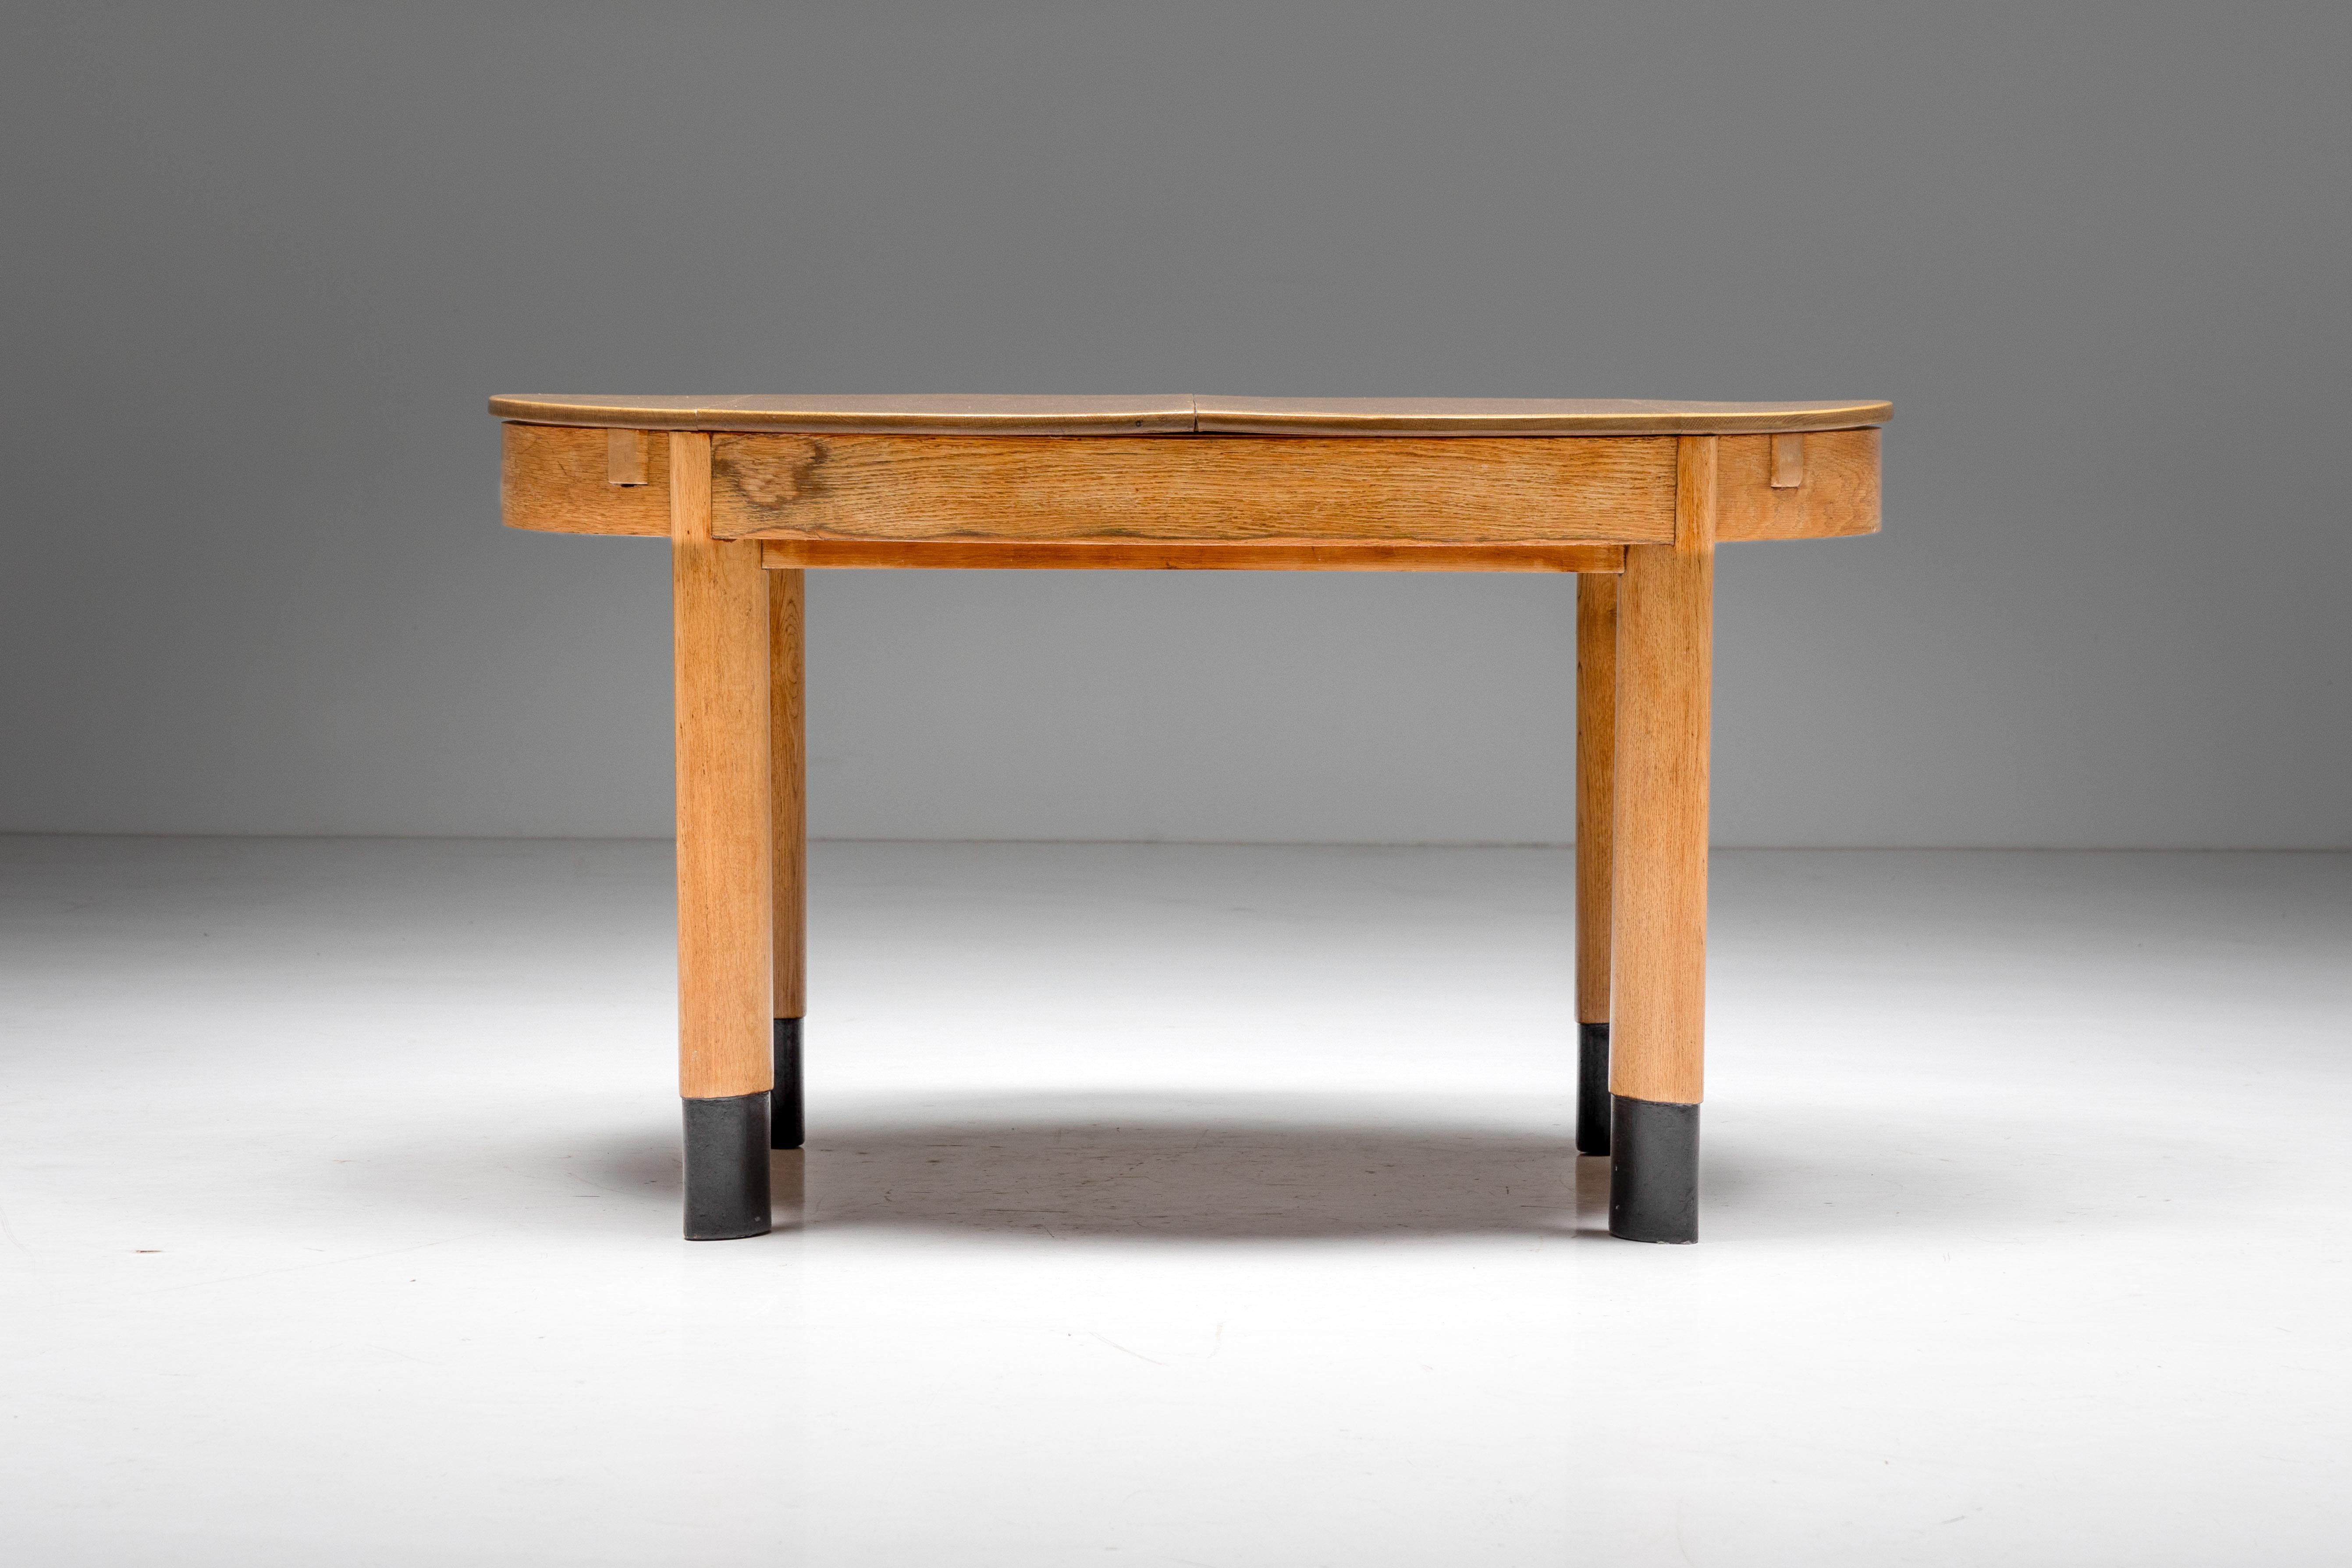 Dutch Rationalist Oval Dining Table in Oak, Holland, 1920s For Sale